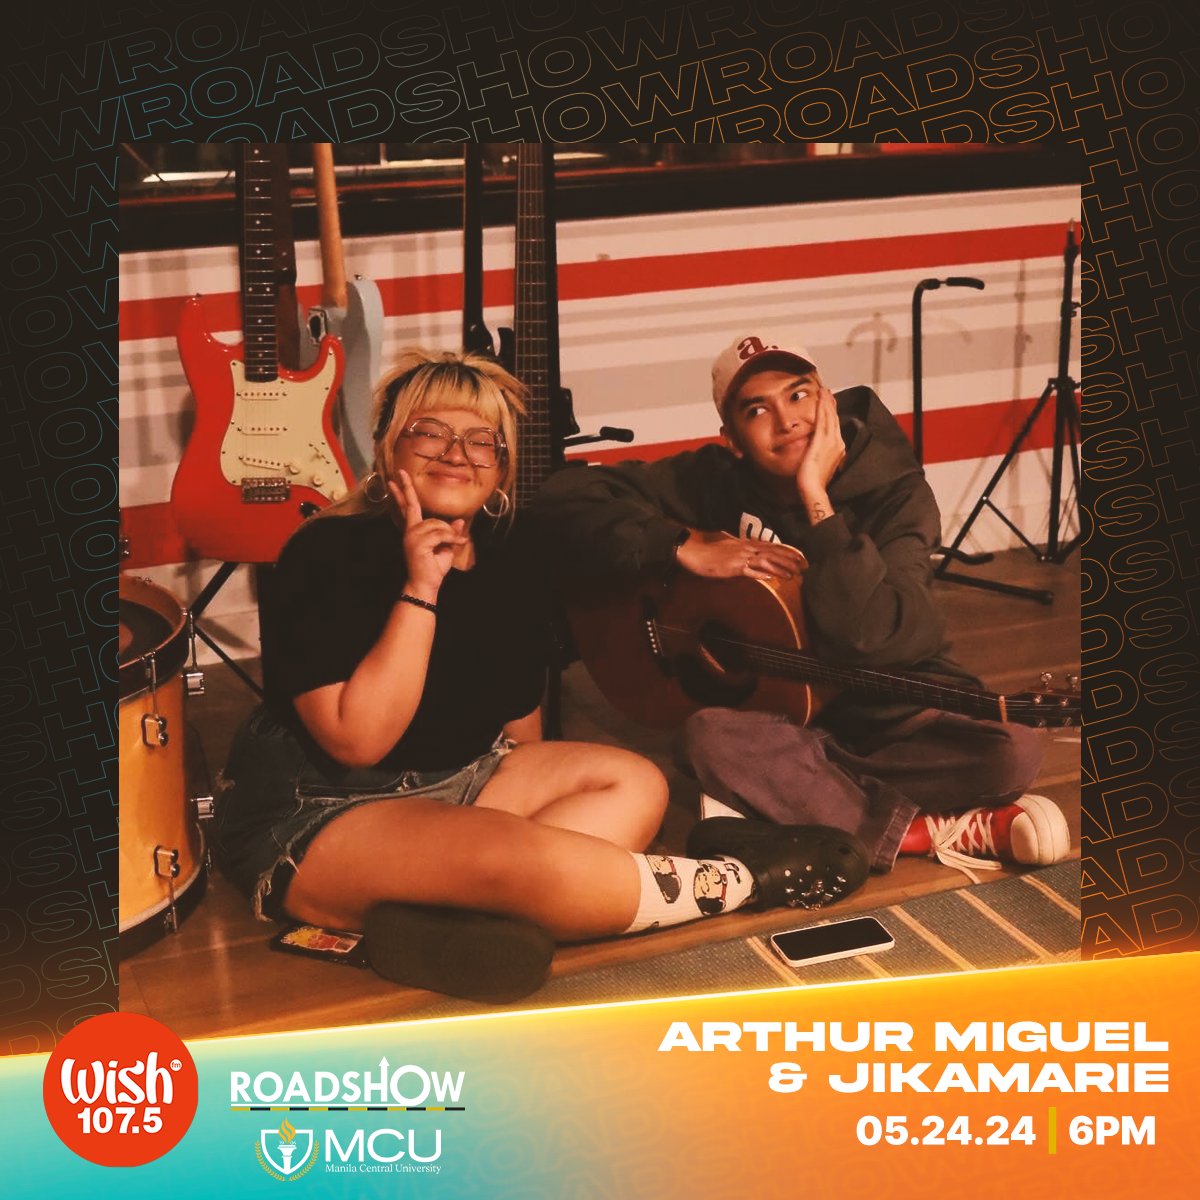 Join Filipino-Canadian crooner @RUSSELLislovely, indie/pop/alt band @thenamelesskids, and singer-songwriters @arthurmiguelii and @jikamarie on today's Roadshow! Watch their live performances aboard the Wish Bus at Manila Central University (MCU).